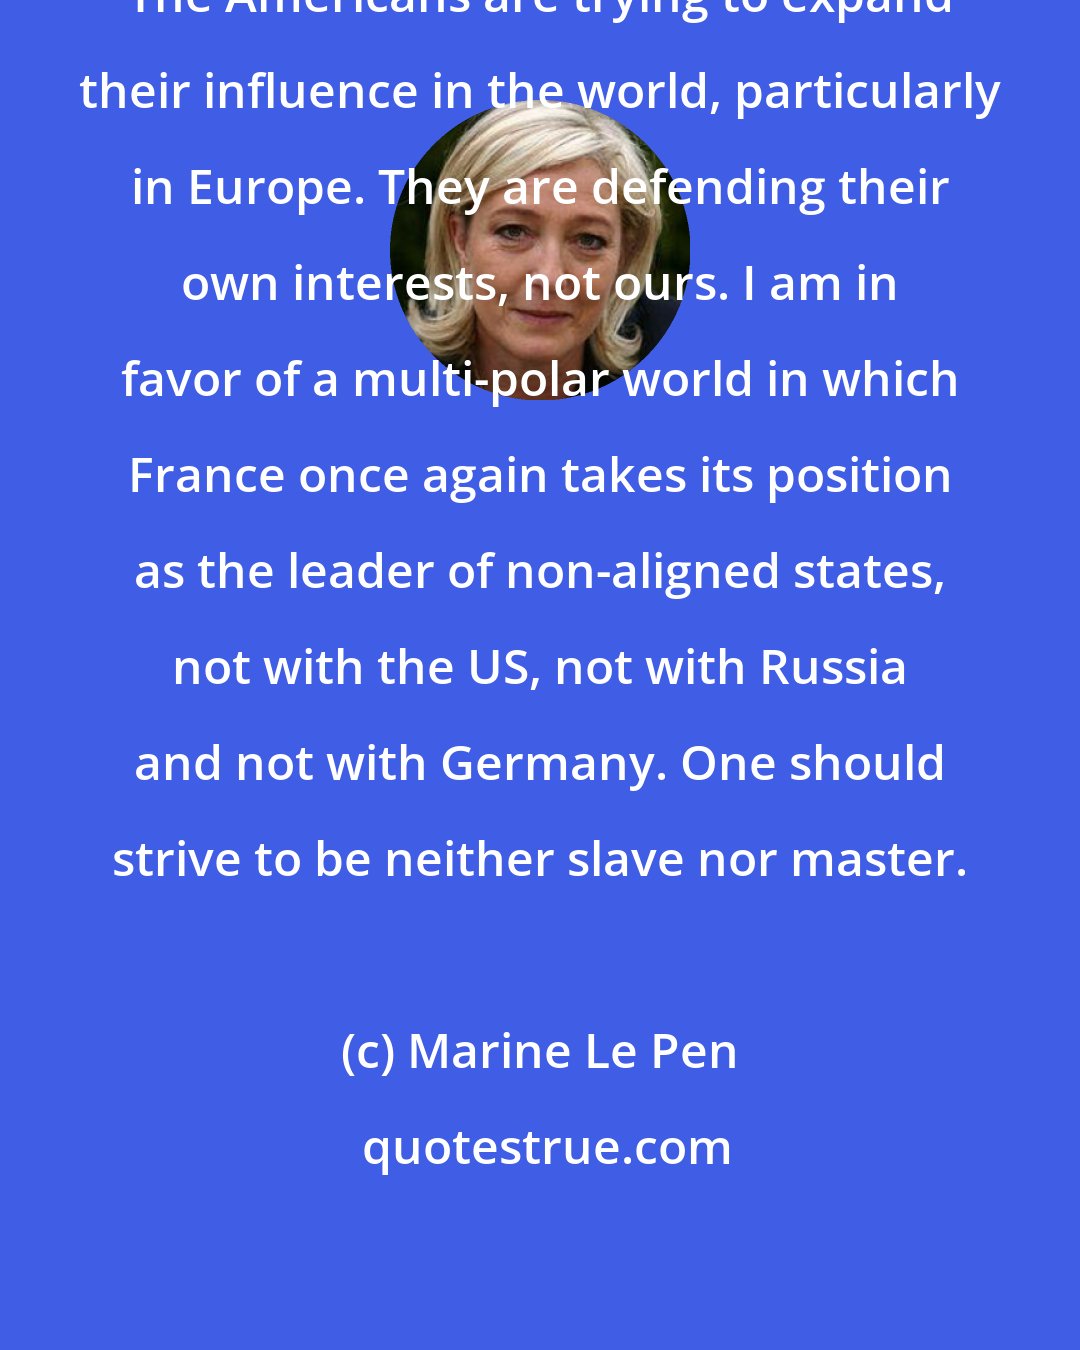 Marine Le Pen: The Americans are trying to expand their influence in the world, particularly in Europe. They are defending their own interests, not ours. I am in favor of a multi-polar world in which France once again takes its position as the leader of non-aligned states, not with the US, not with Russia and not with Germany. One should strive to be neither slave nor master.